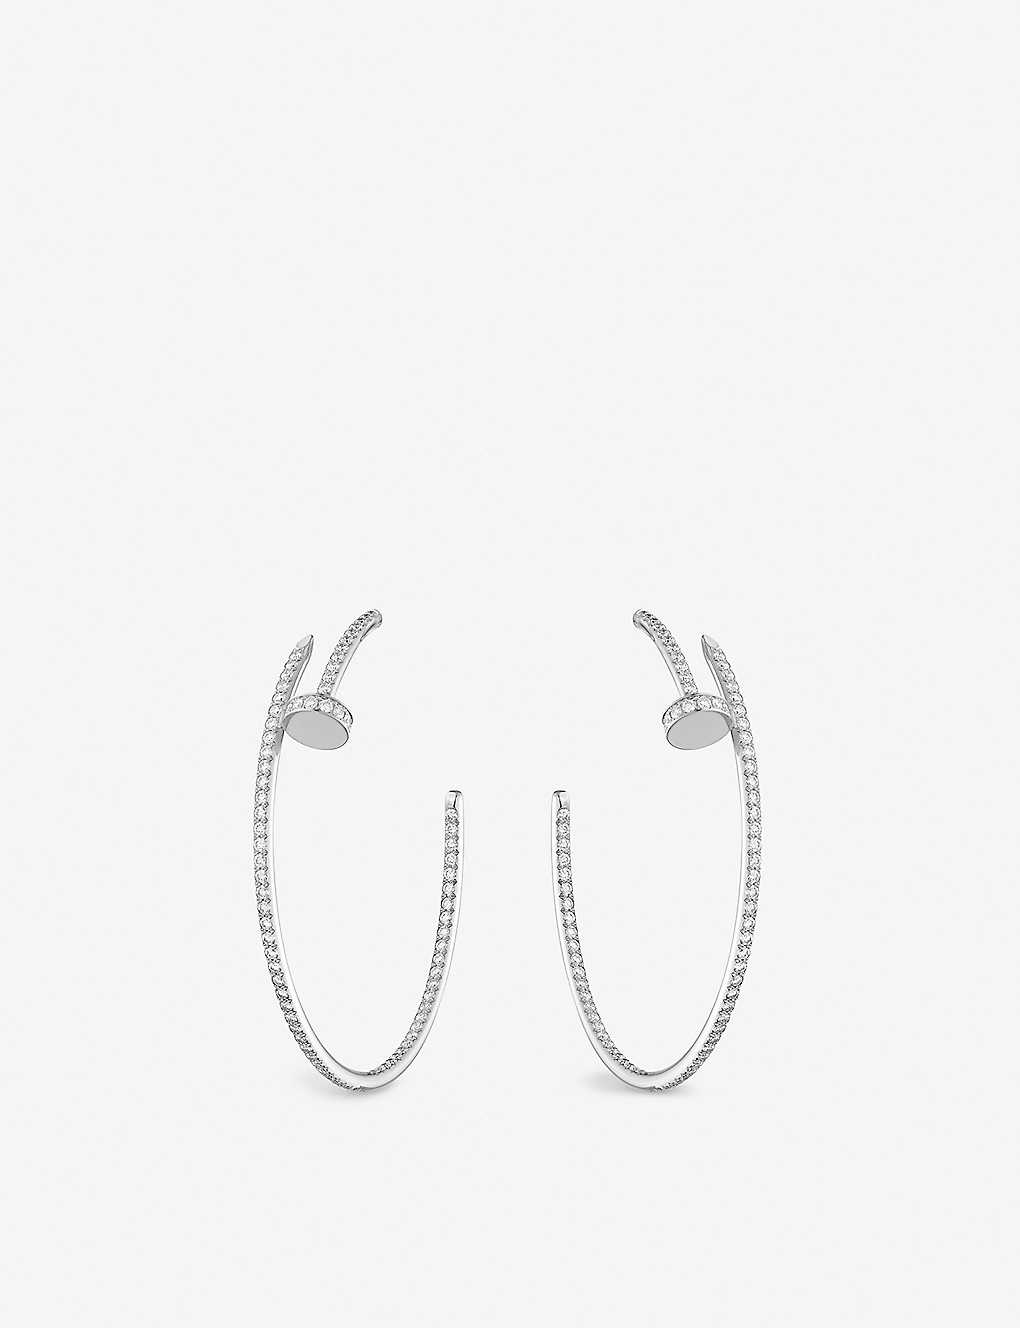 Cartier Womens White Gold Juste Un Clou 18ct White-gold And 1.26ct Brilliant-cut Diamond Earrings